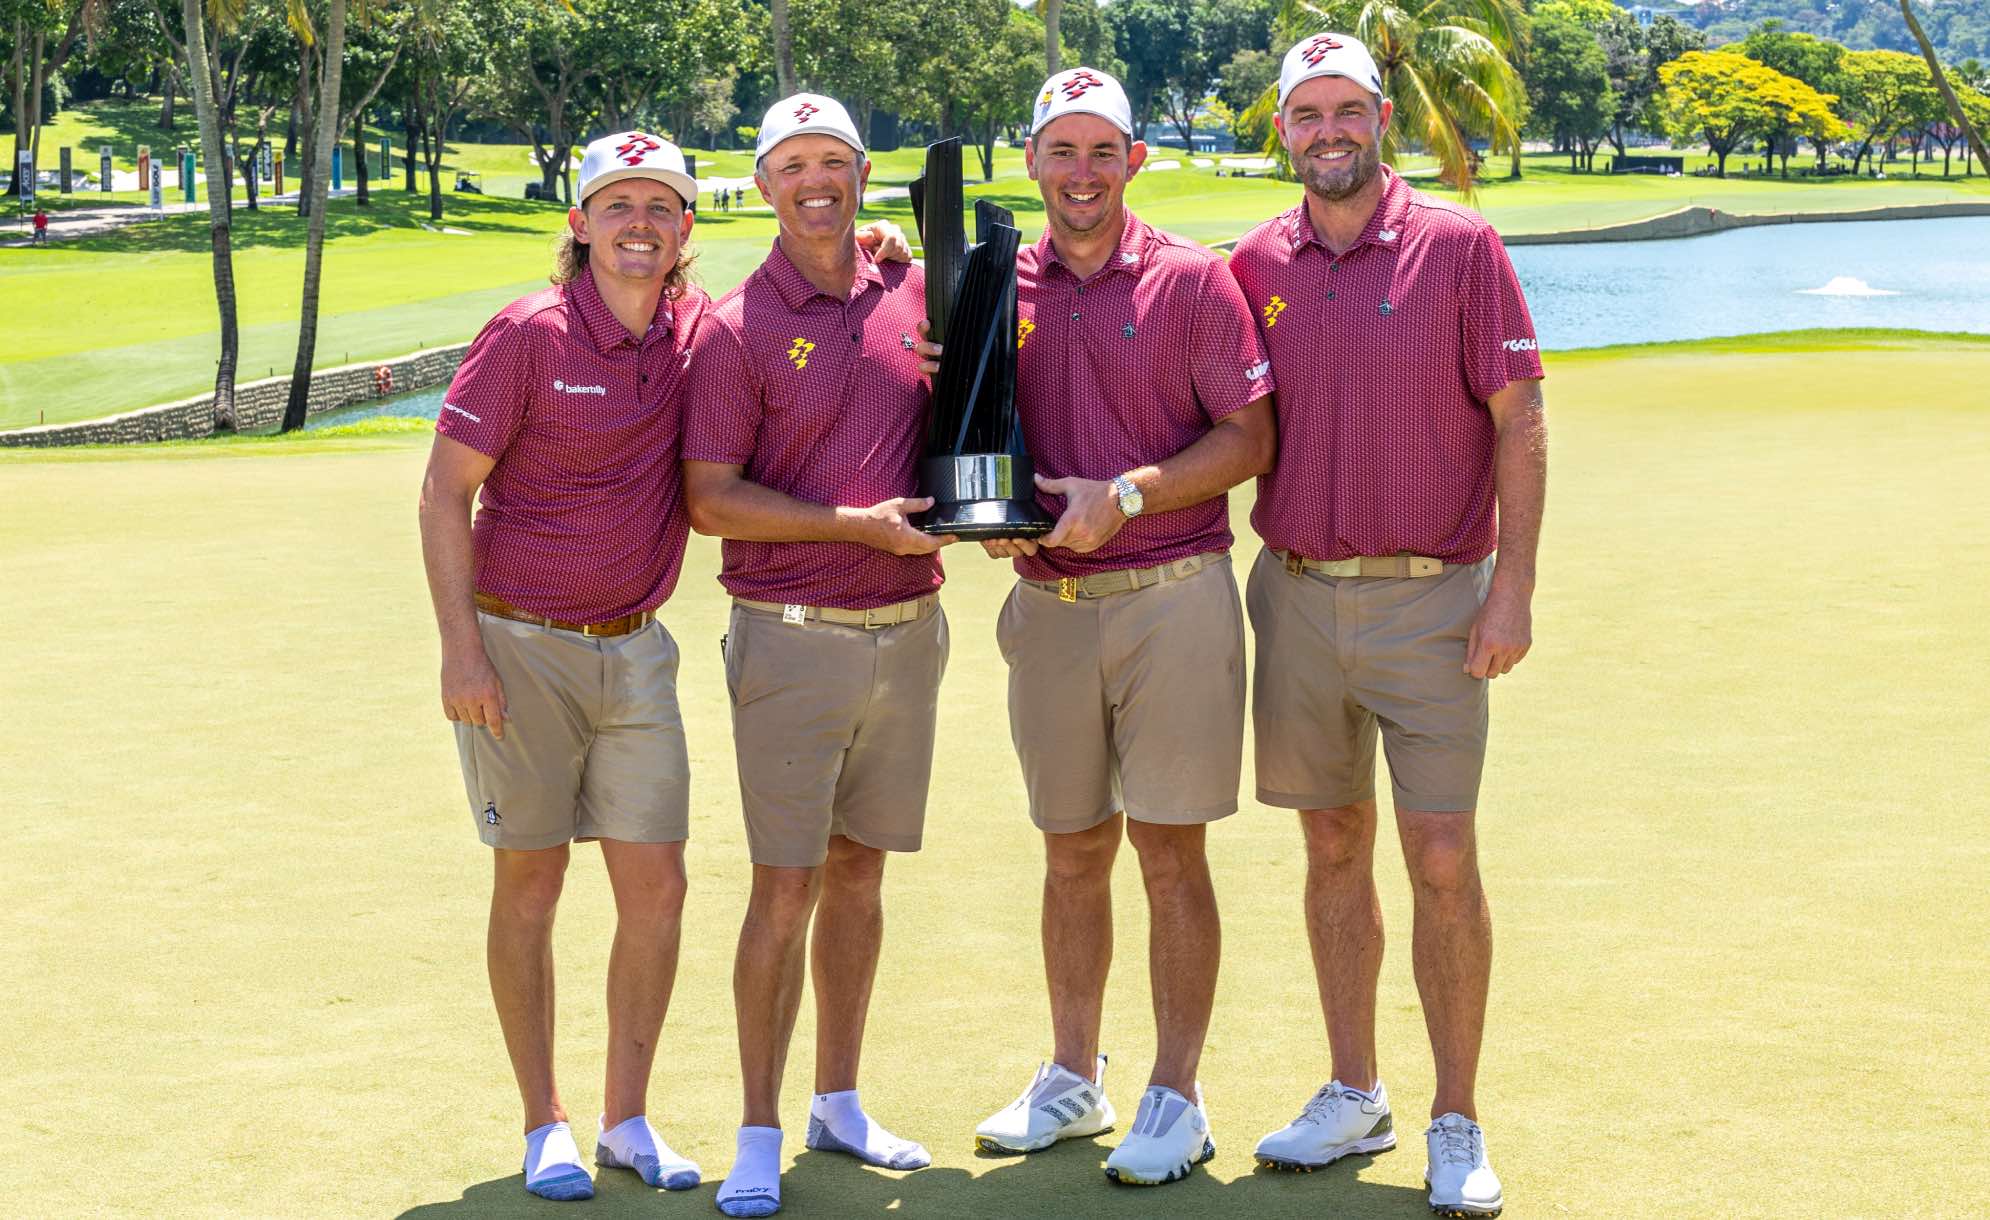 Team Champions Cameron Smith, Matt Jones, Lucas Herbert and Marc Leishman of Ripper GC pose with the trophy after the final round of LIV Golf Singapore at Sentosa Golf Club